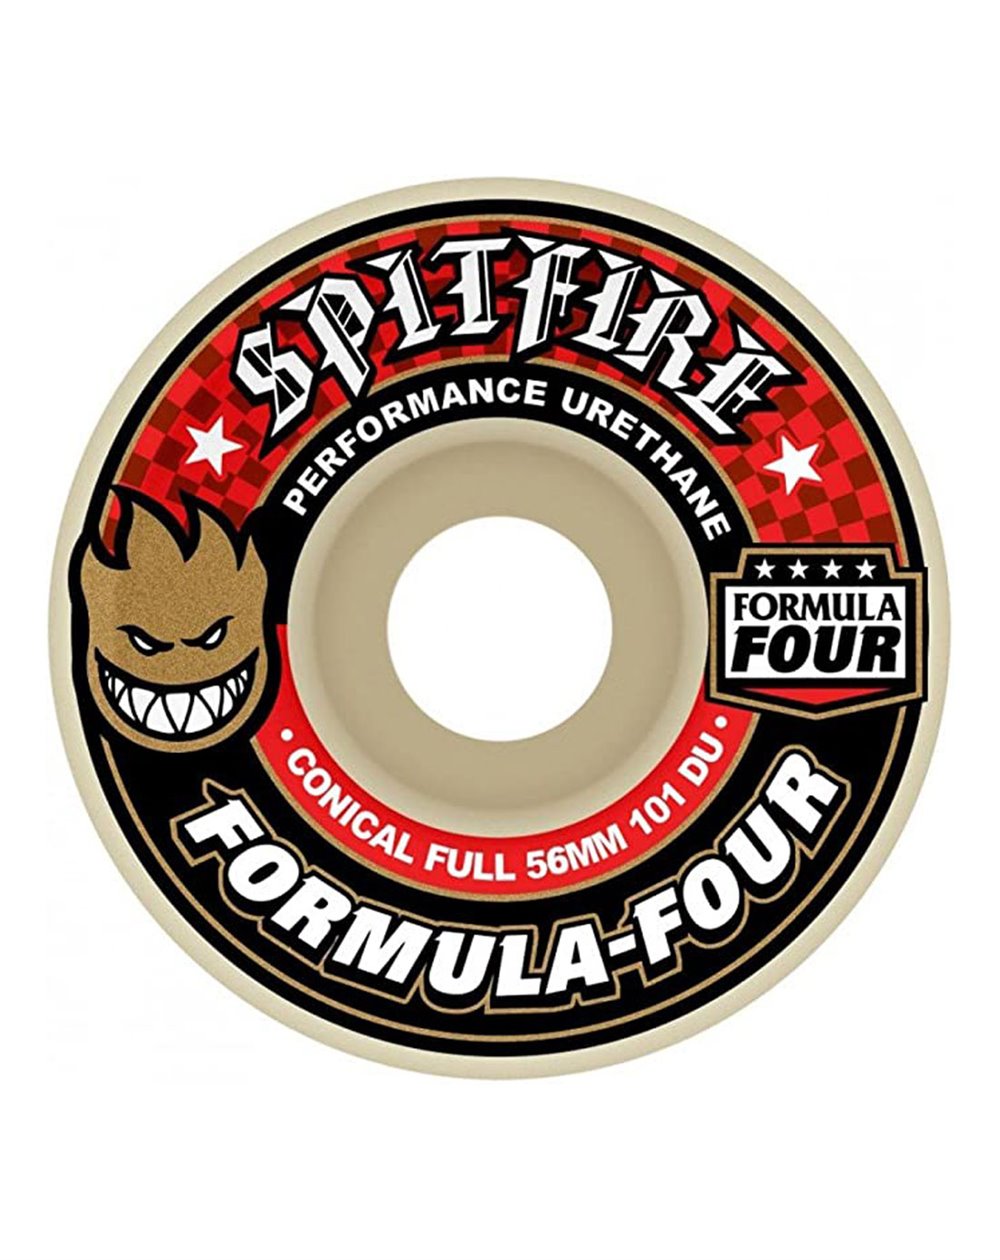 Spitfire Formula Four Conical Full 56mm 101A Skateboard Wheels pack of 4